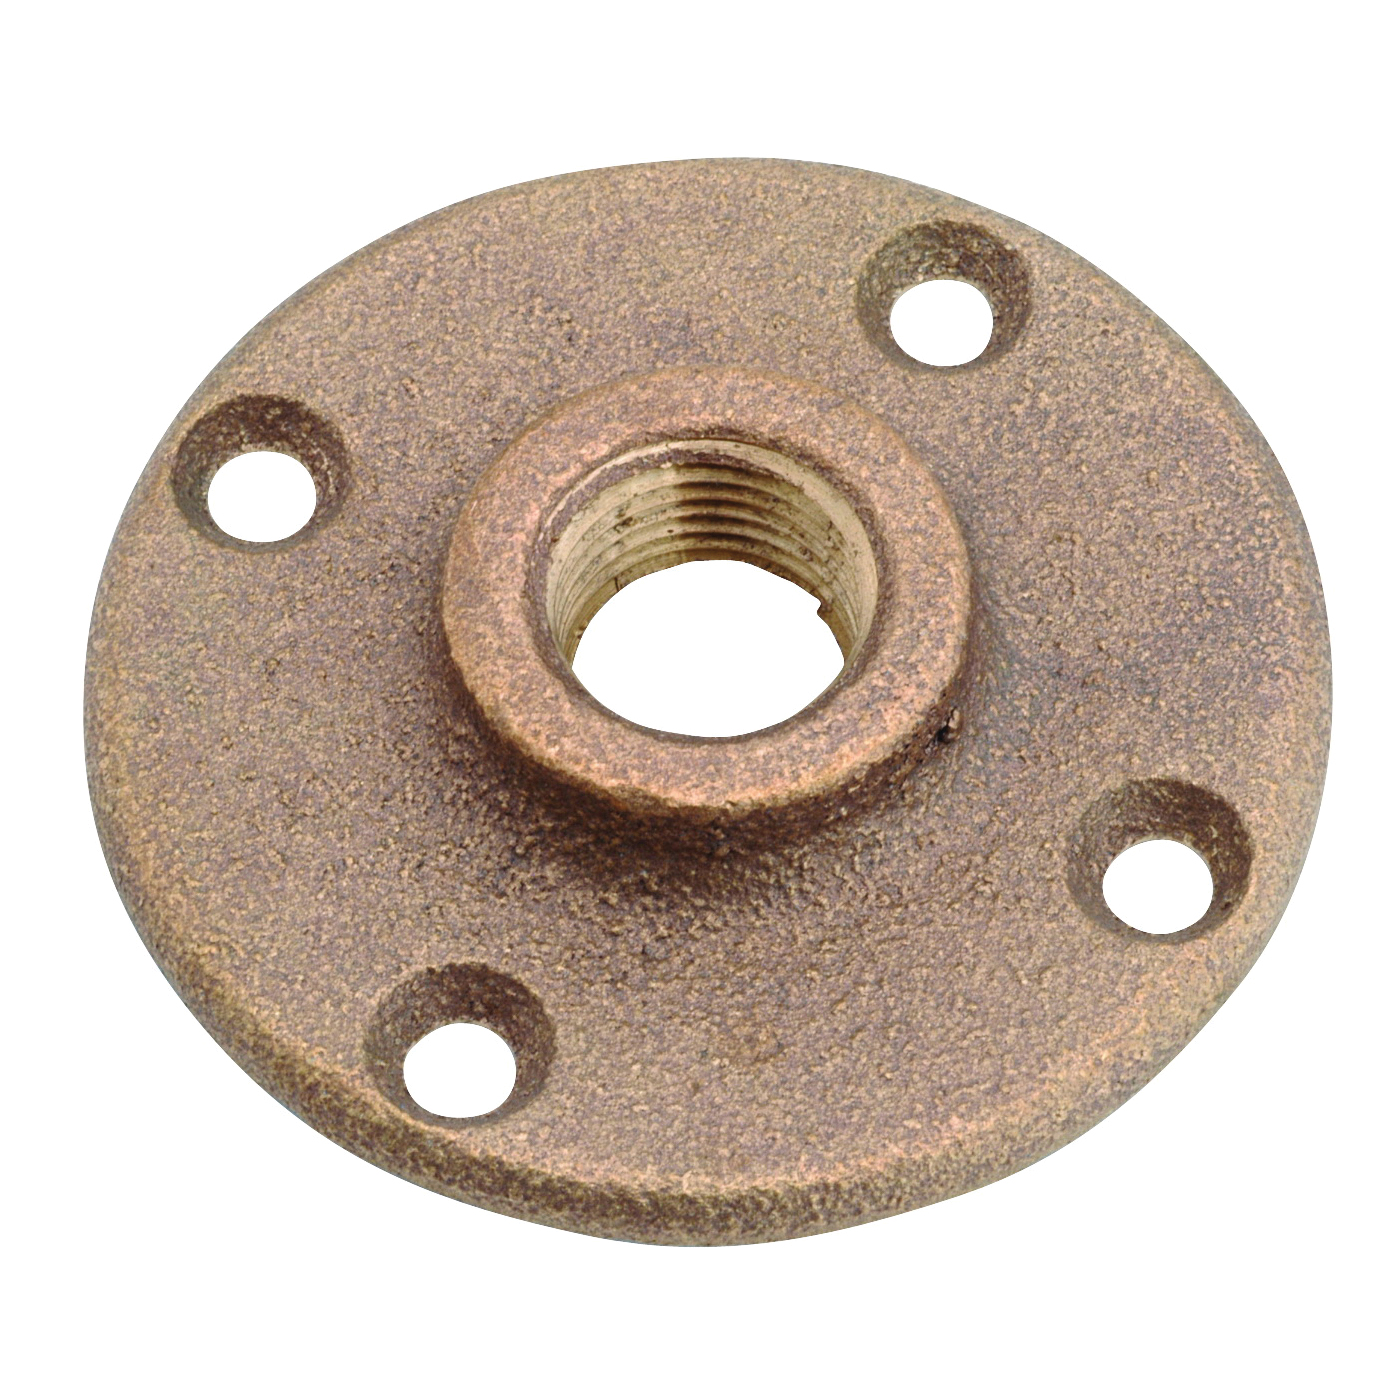 738151-08 Floor Pipe Flange, 1/2 in, 4-Bolt Hole, Red Brass